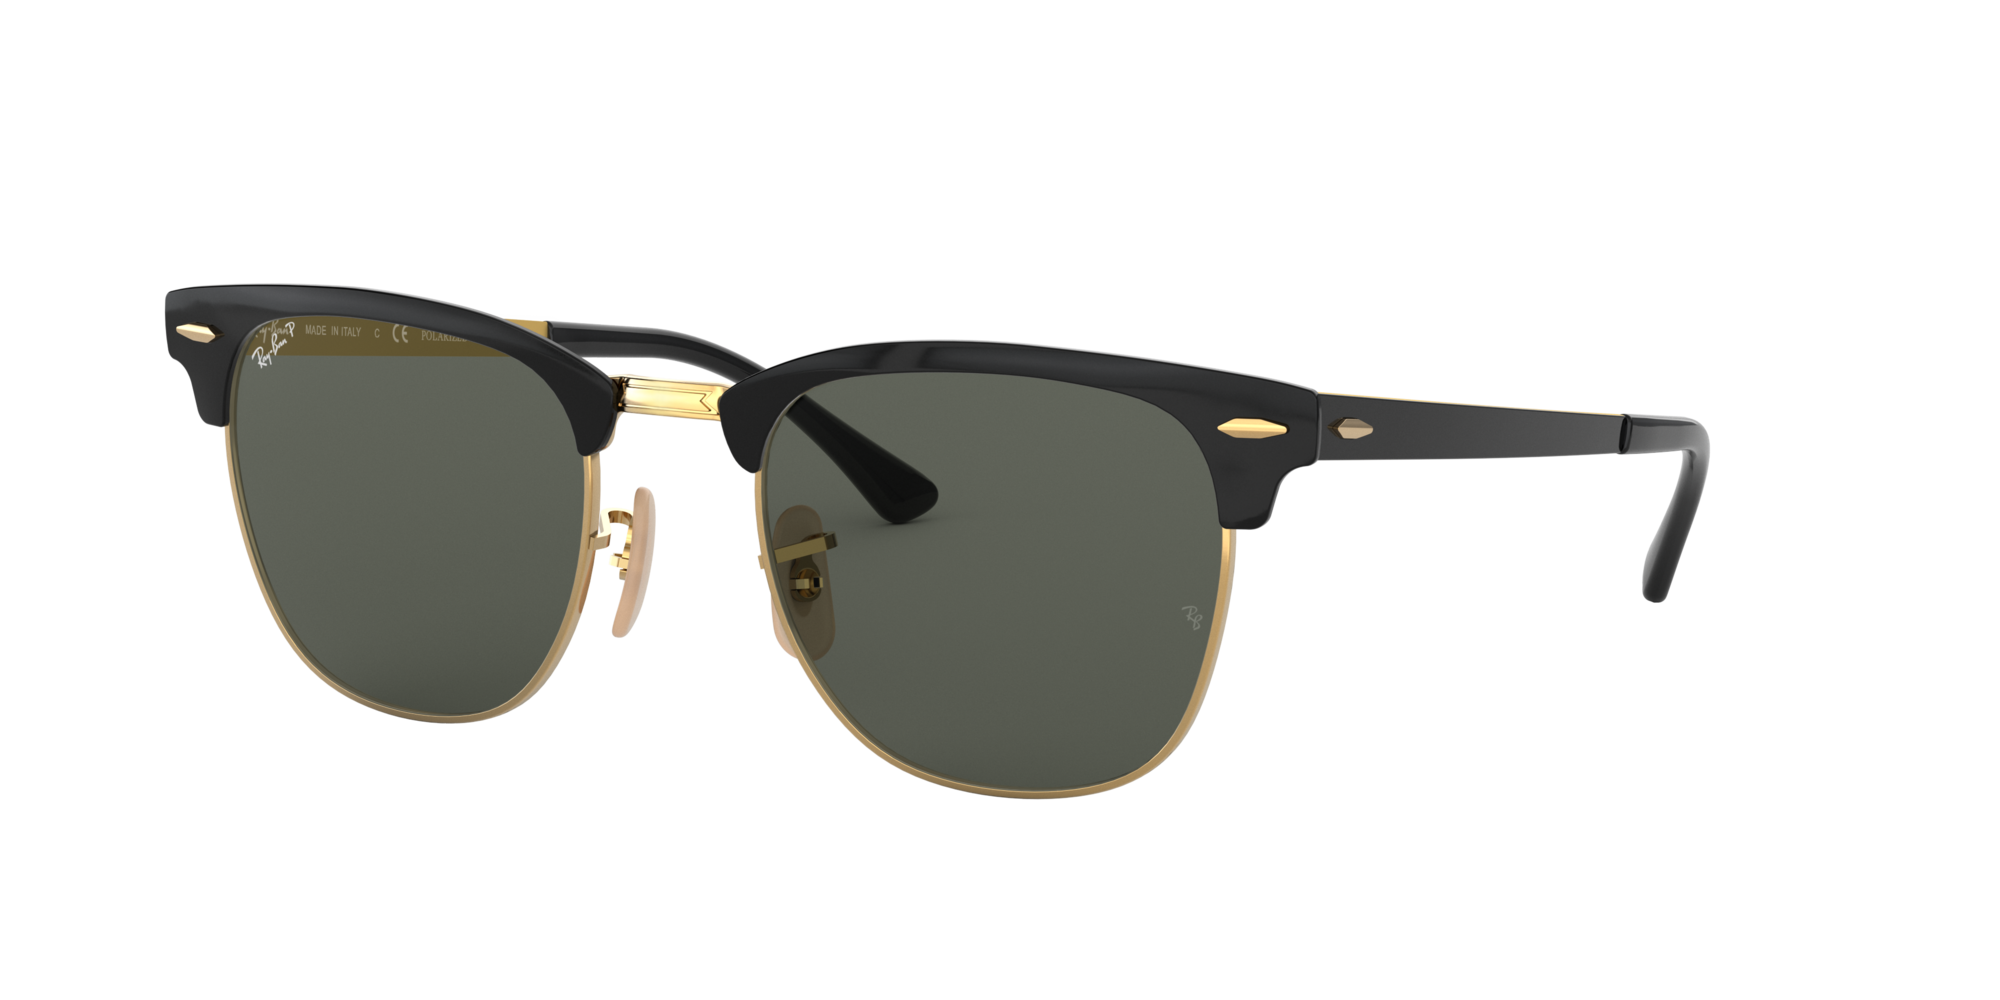 Ray-Ban 0RB3716 in Black Sunglasses | OPSM